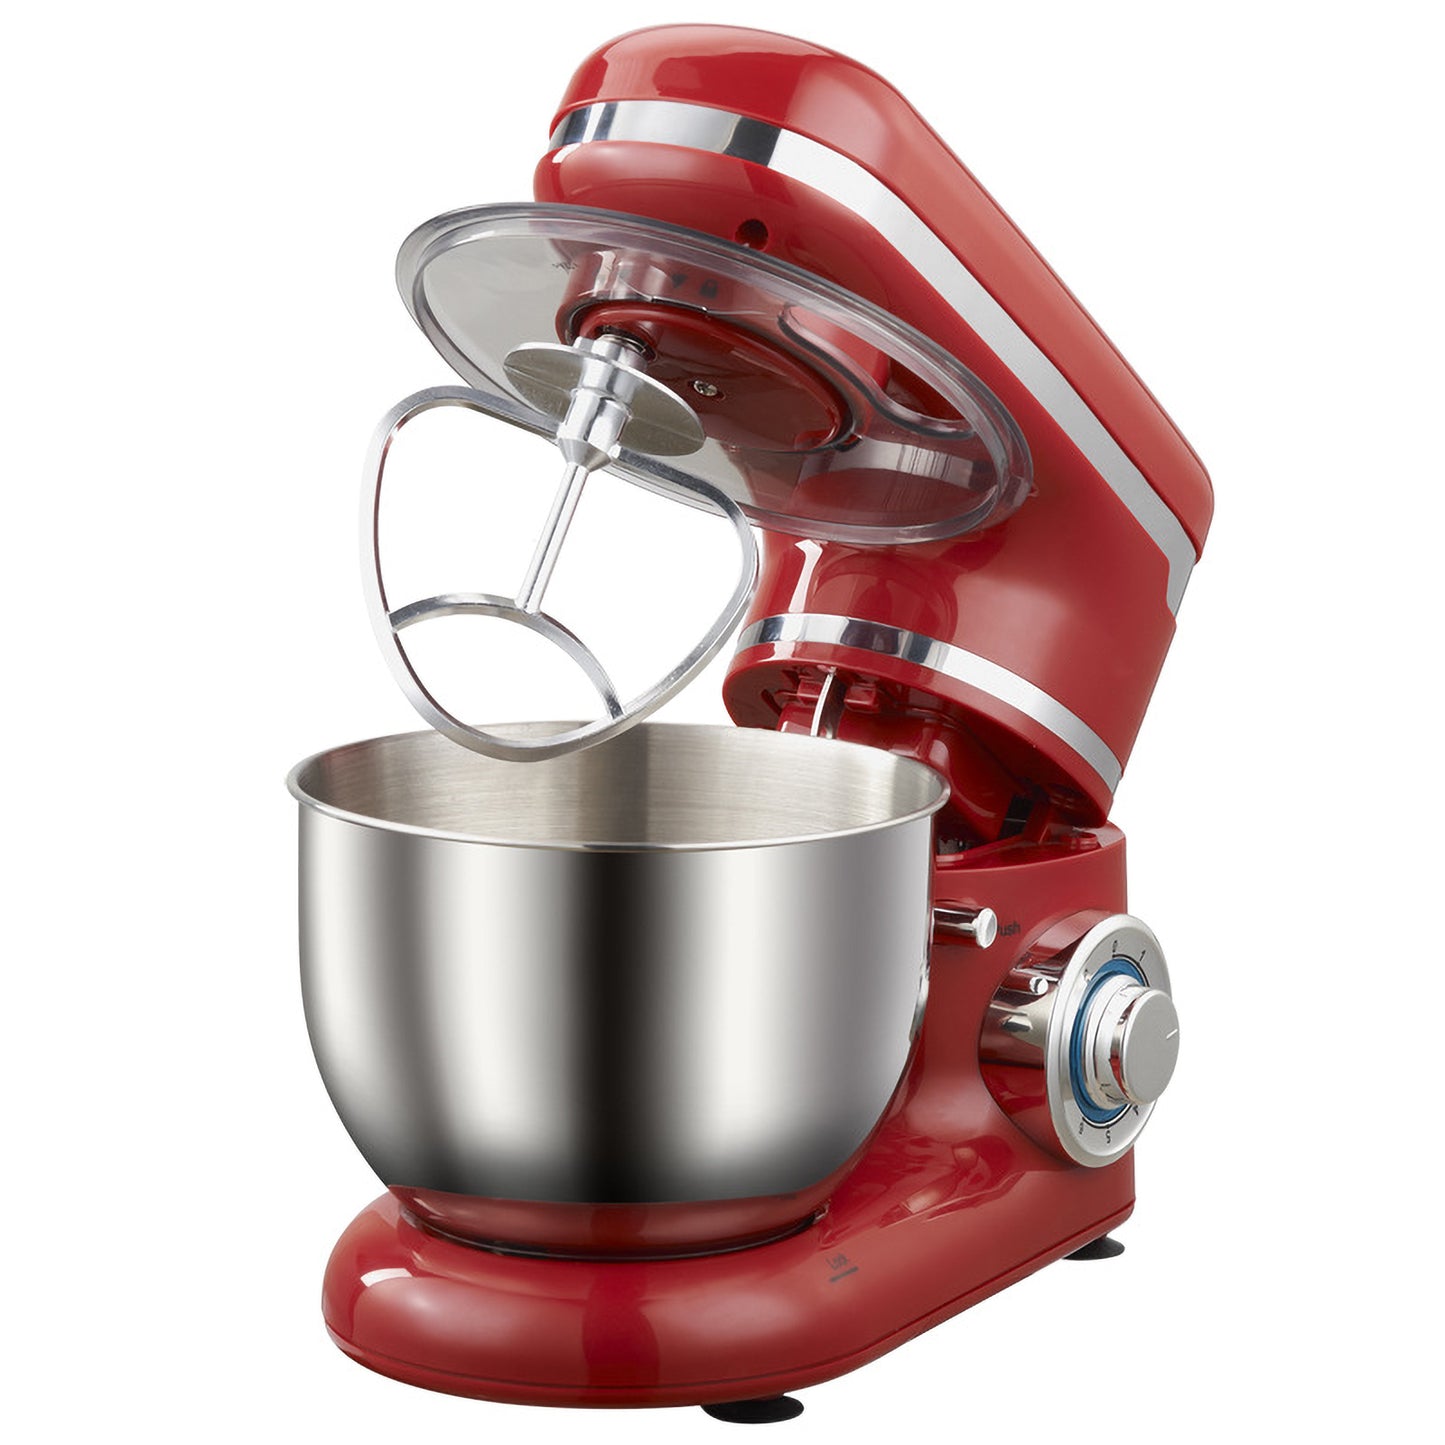 AnjieloSmart Electric Stand Mixer Food Mixer 1200W 3.52 QT 6 Variable Speed